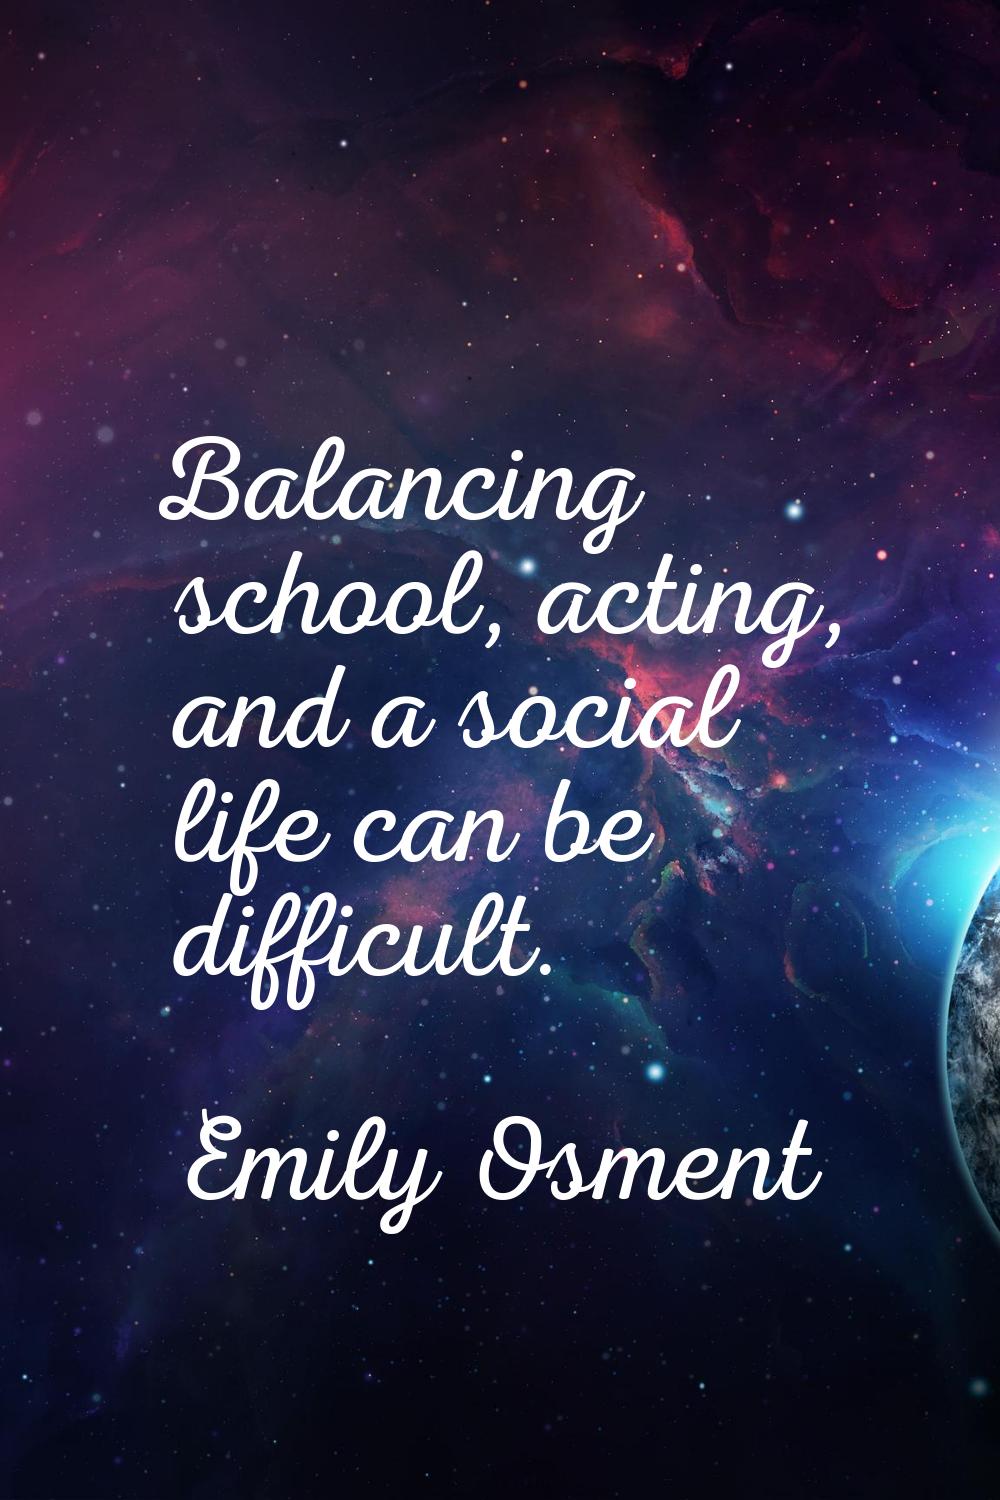 Balancing school, acting, and a social life can be difficult.